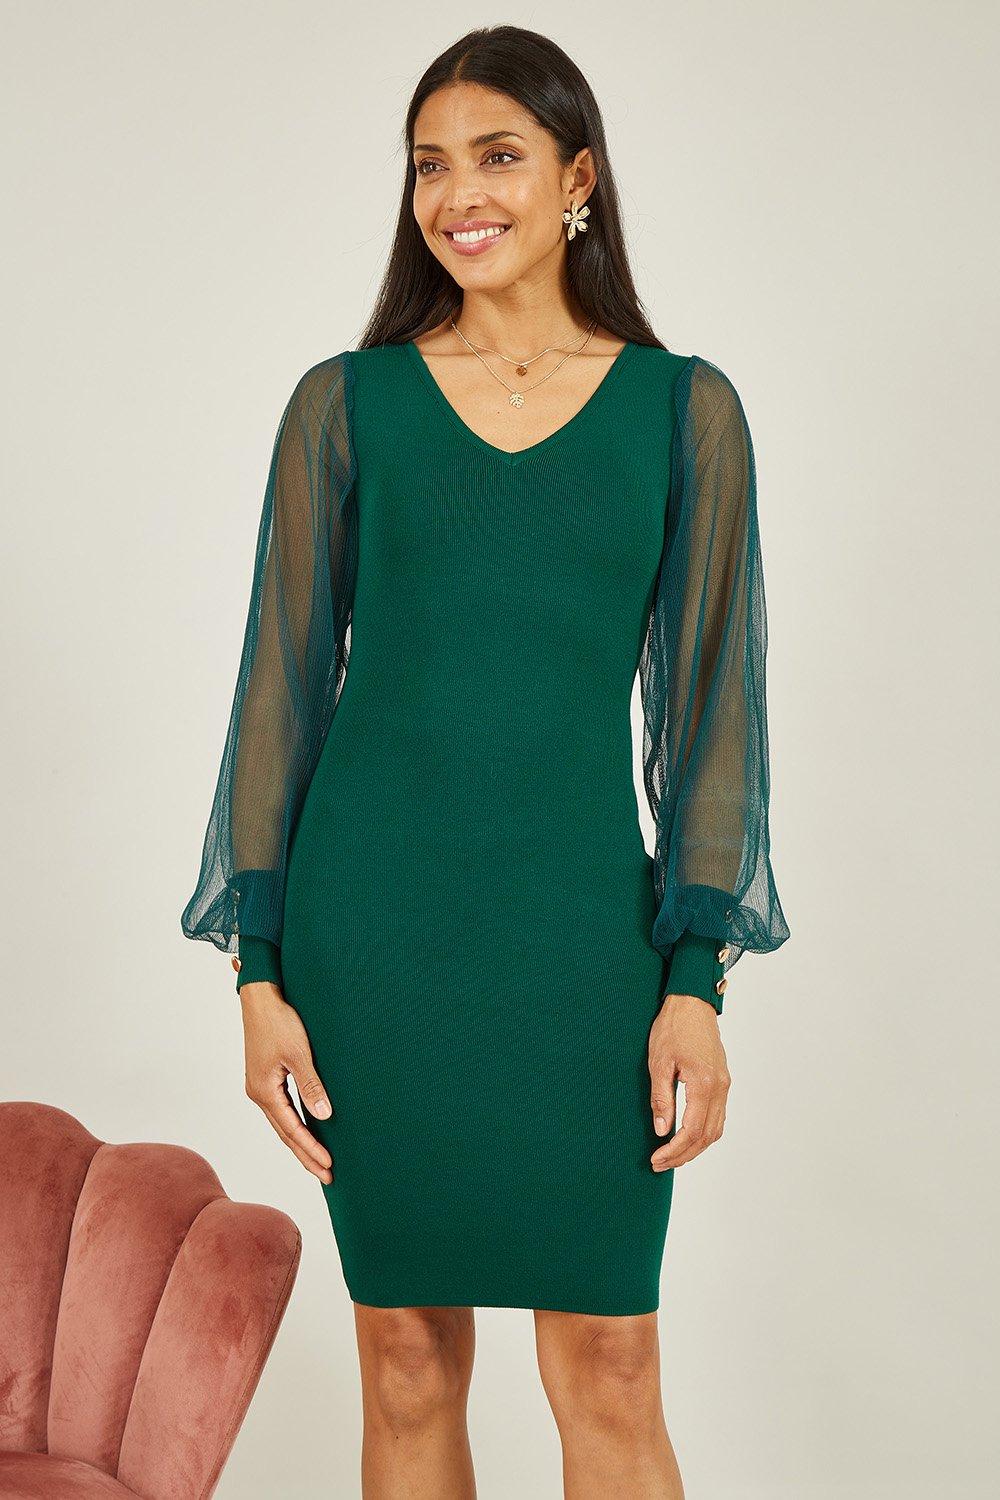 Green Knitted Body Con Dress With Chiffon Sleeve